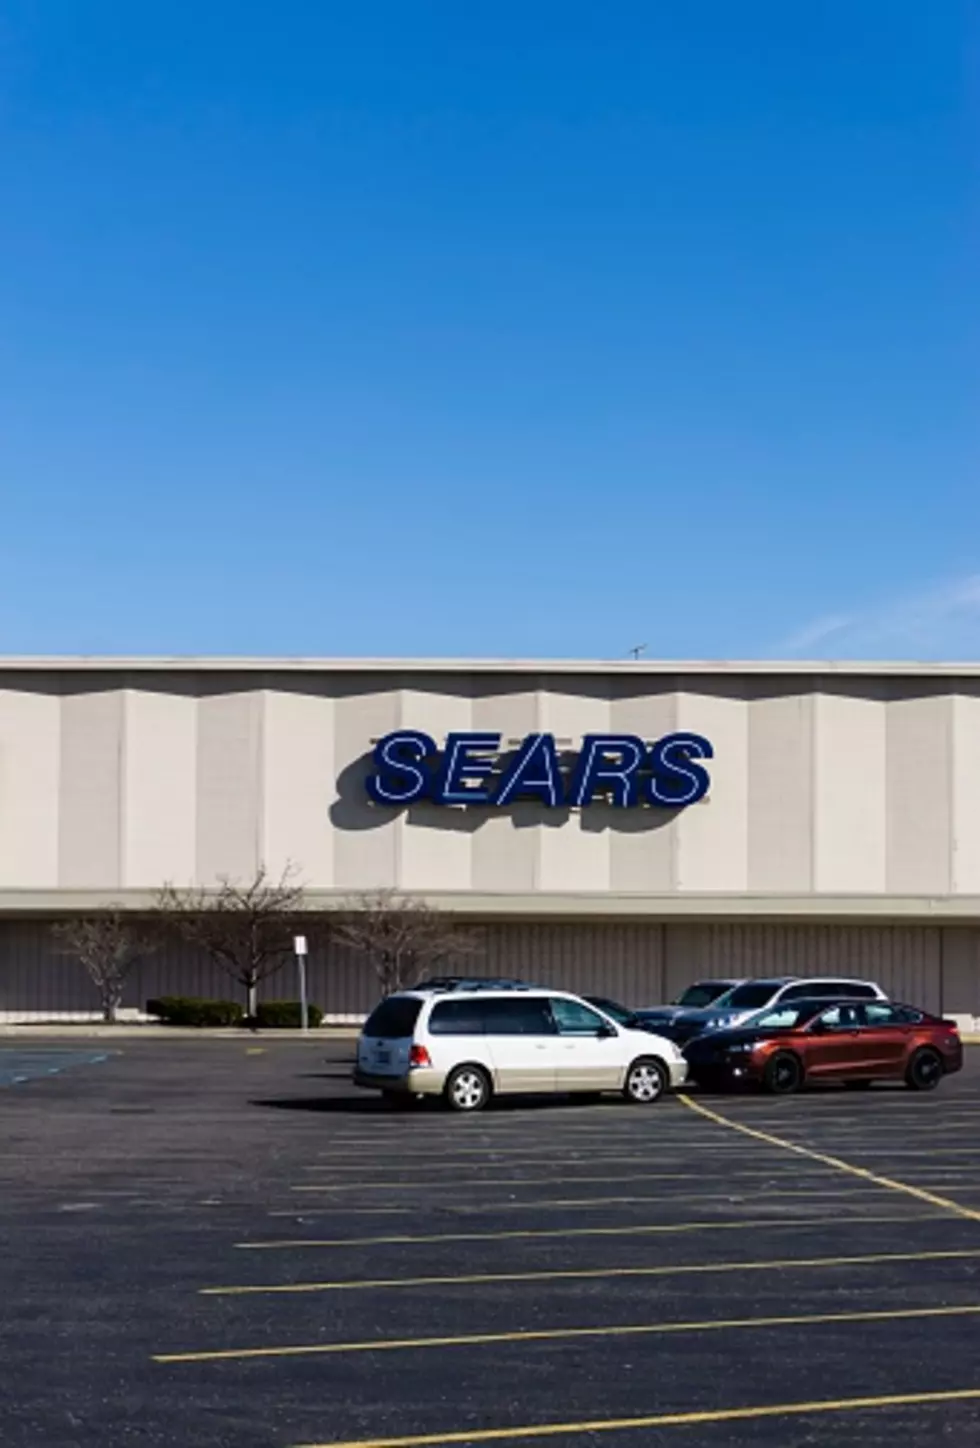 Illinois-Based Sears to Close Another 72 Stores